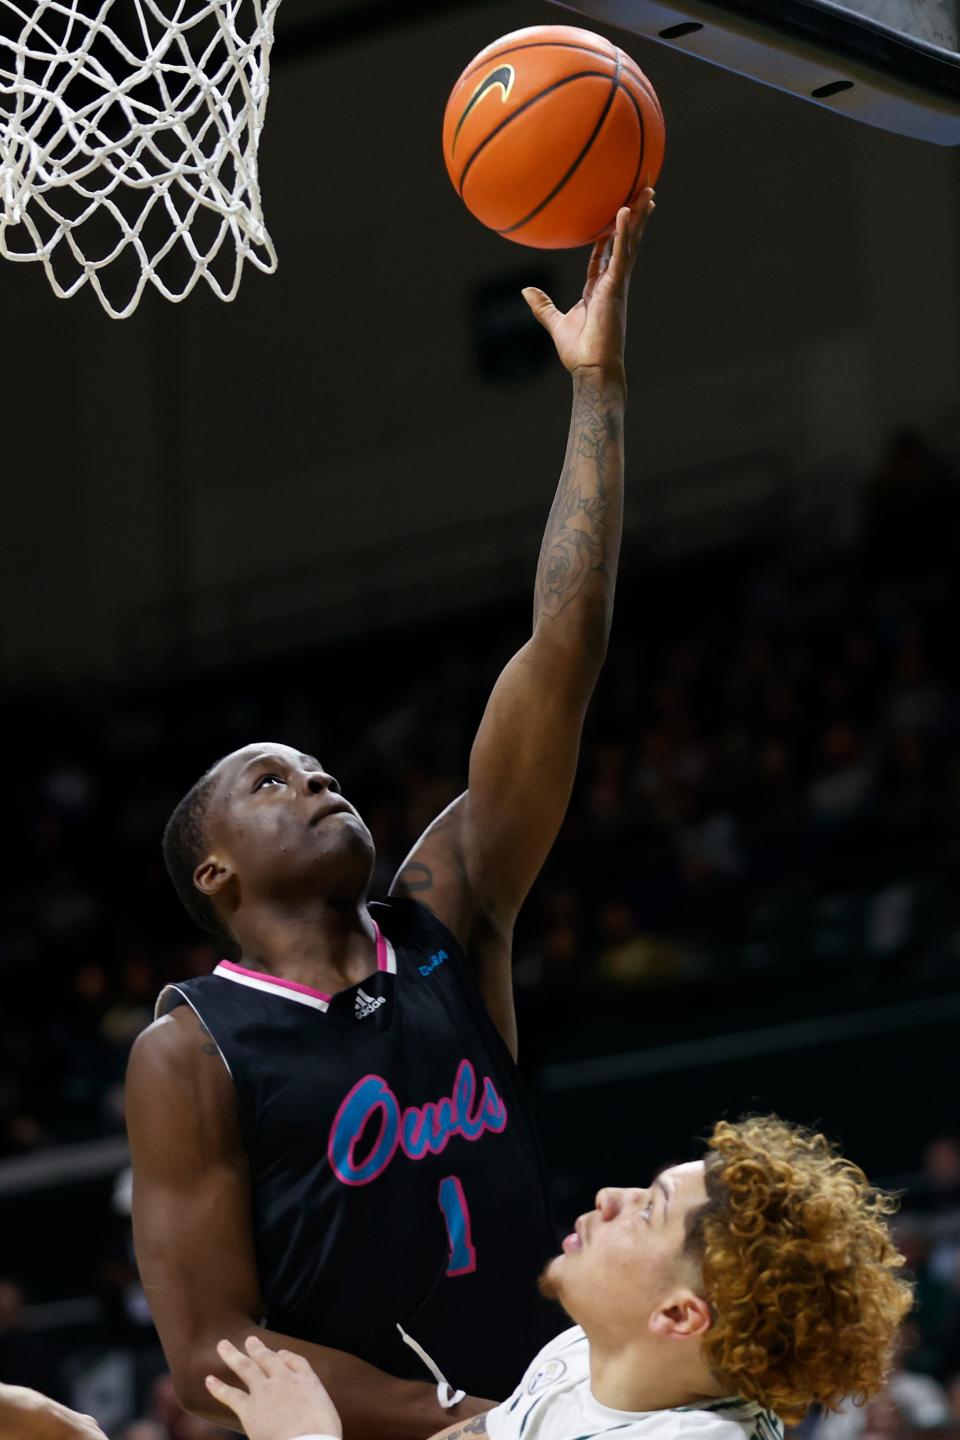 Florida Atlantic guard Johnell Davis, left, shoots over Charlotte guard Lu'Cye Patterson during the second half of an NCAA college basketball game in Charlotte, N.C., Saturday, Feb. 4, 2023. (AP Photo/Nell Redmond)